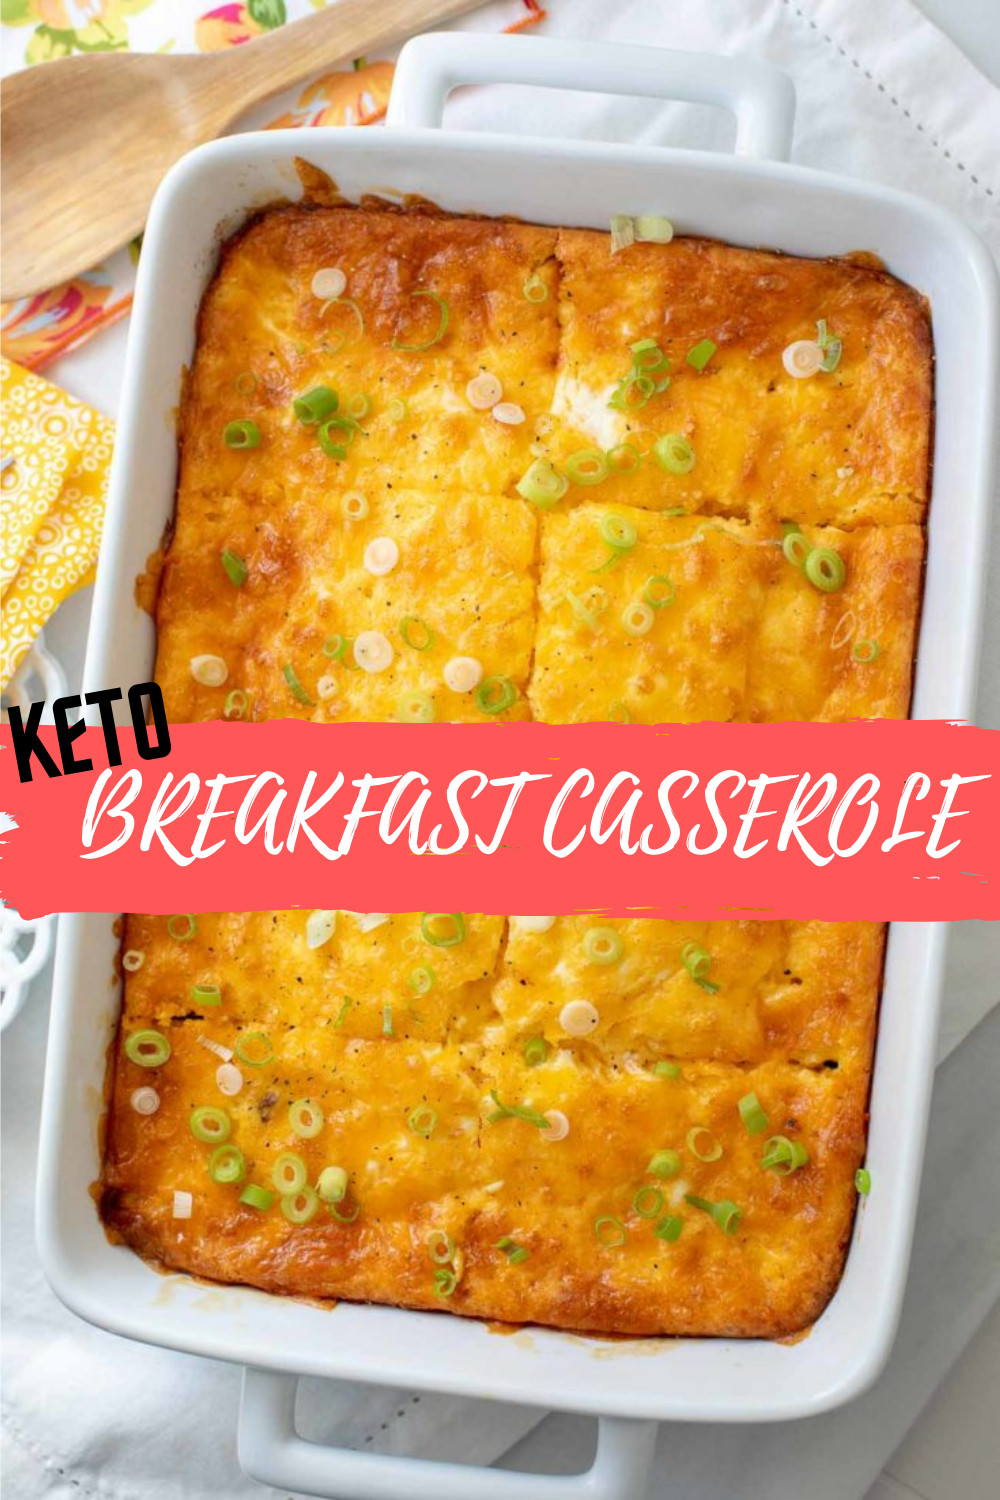 Vegetarian Keto Casserole Recipes
 Ve arian breakfast made easy Cook up this keto